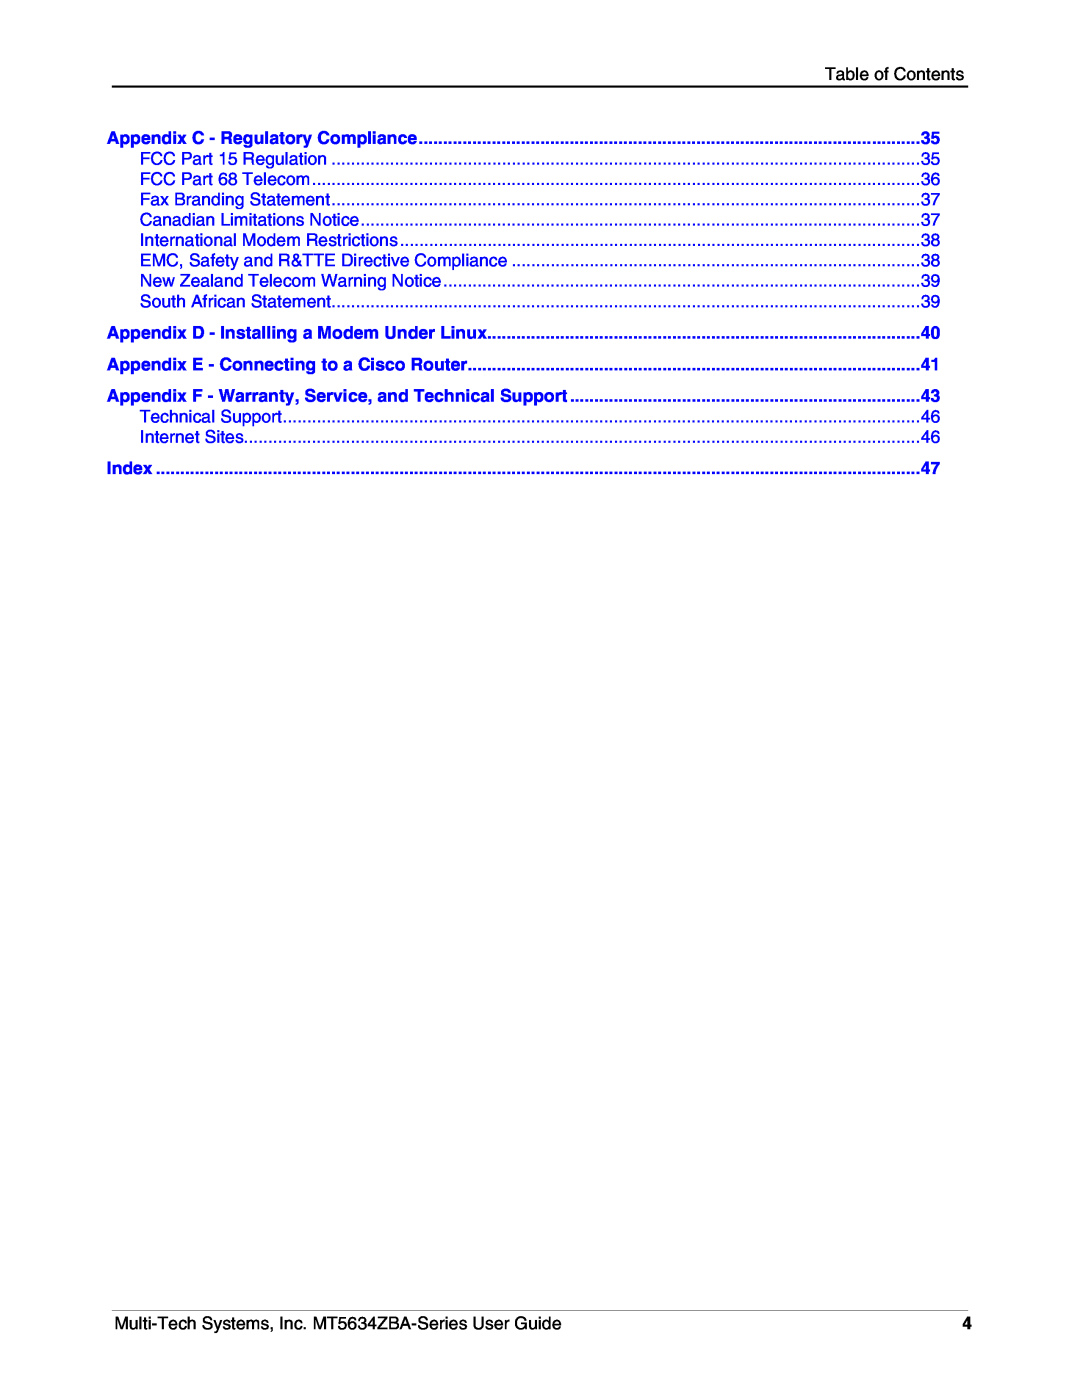 Multi-Tech Systems MT5634ZBAV.90, MT5634ZBA-VV.90 manual Table of Contents, Appendix C - Regulatory Compliance, Index 